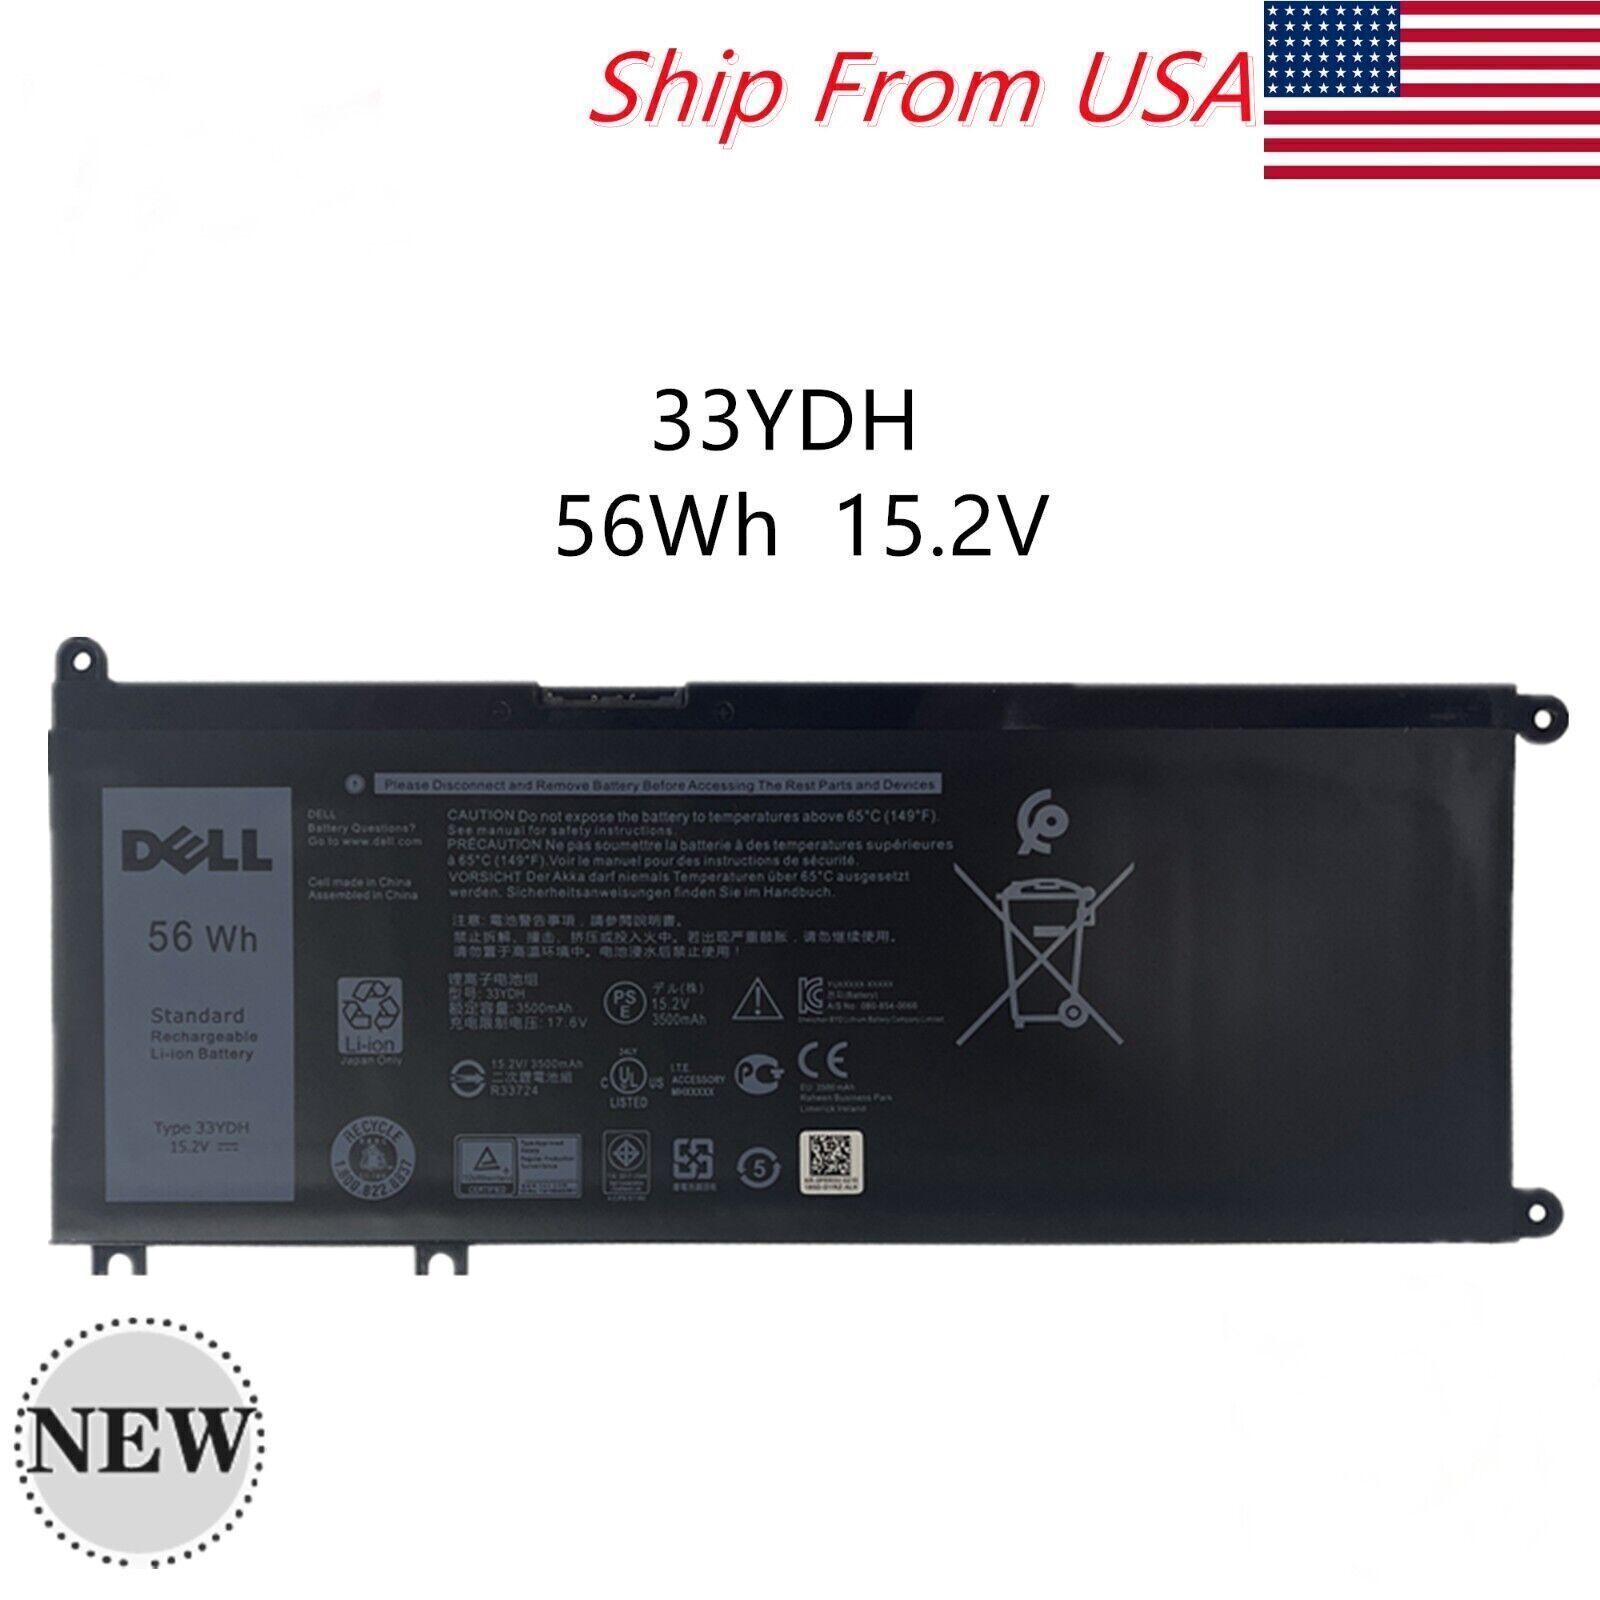 NEW OEM 56Wh 33YDH Battery For Dell Inspiron 7586 7786 7779 2-in-1 Latitude 3490